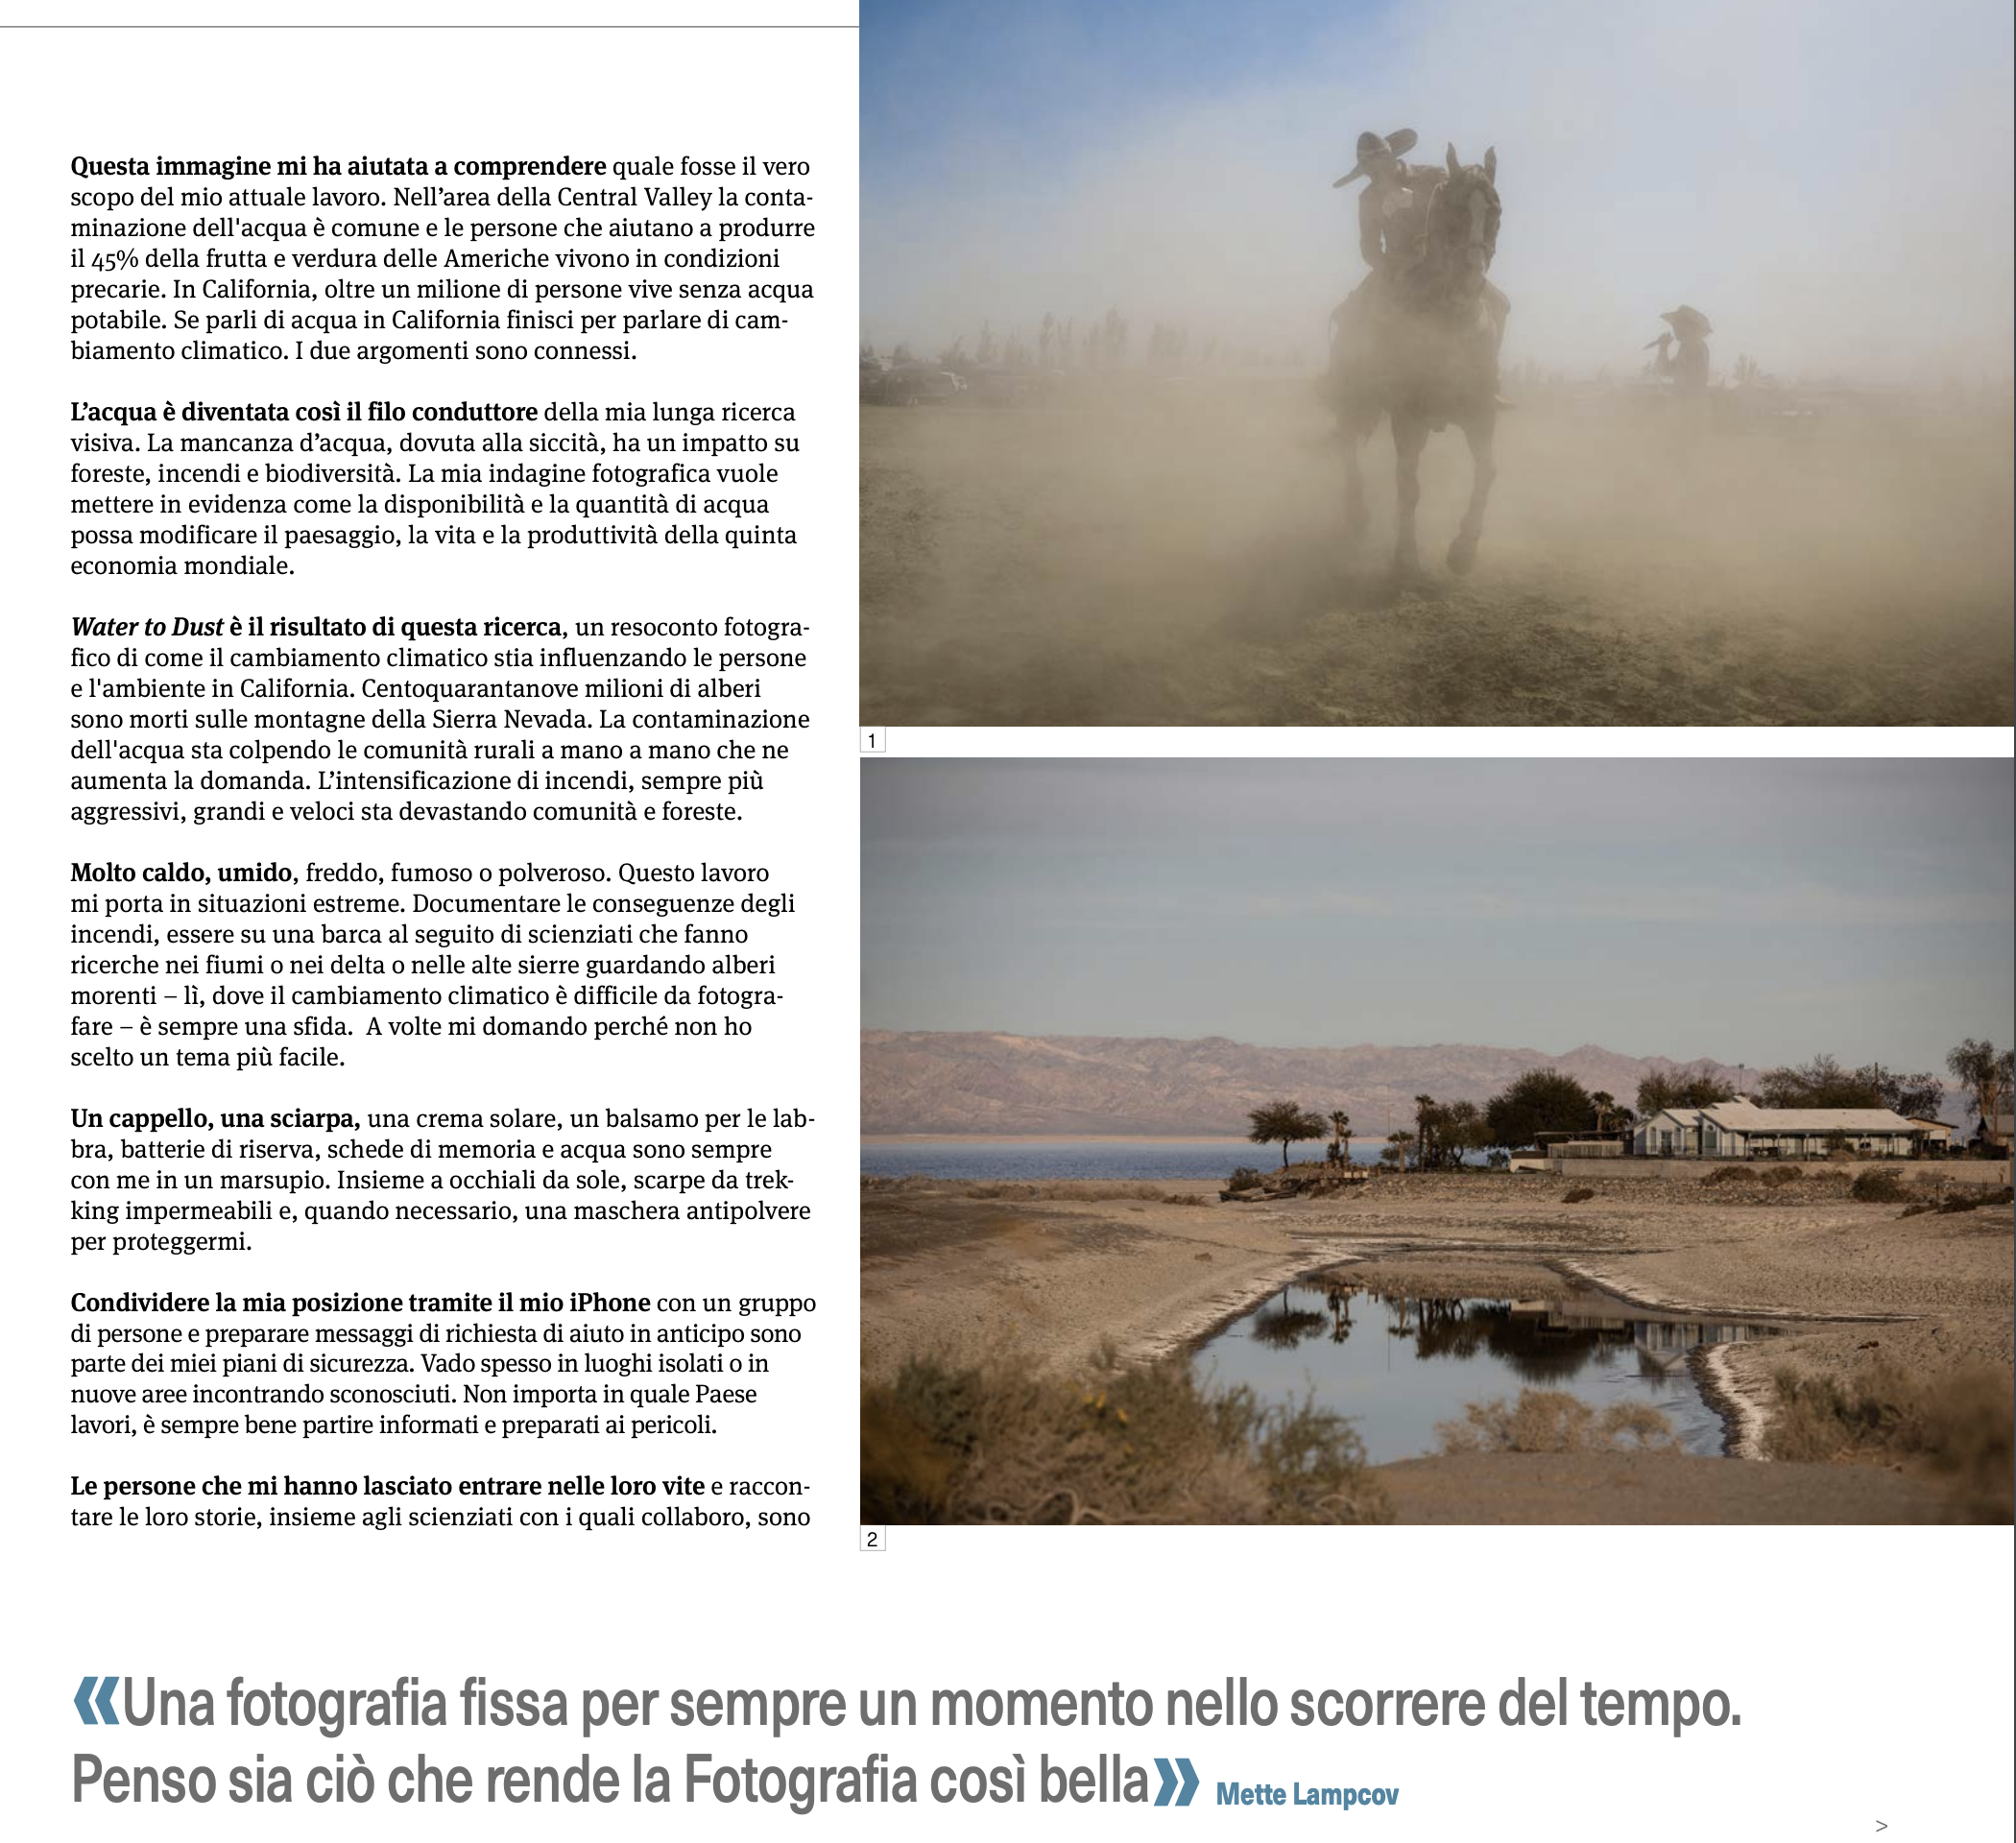 Image from Tear Sheets - Interview in Il Photografo -  